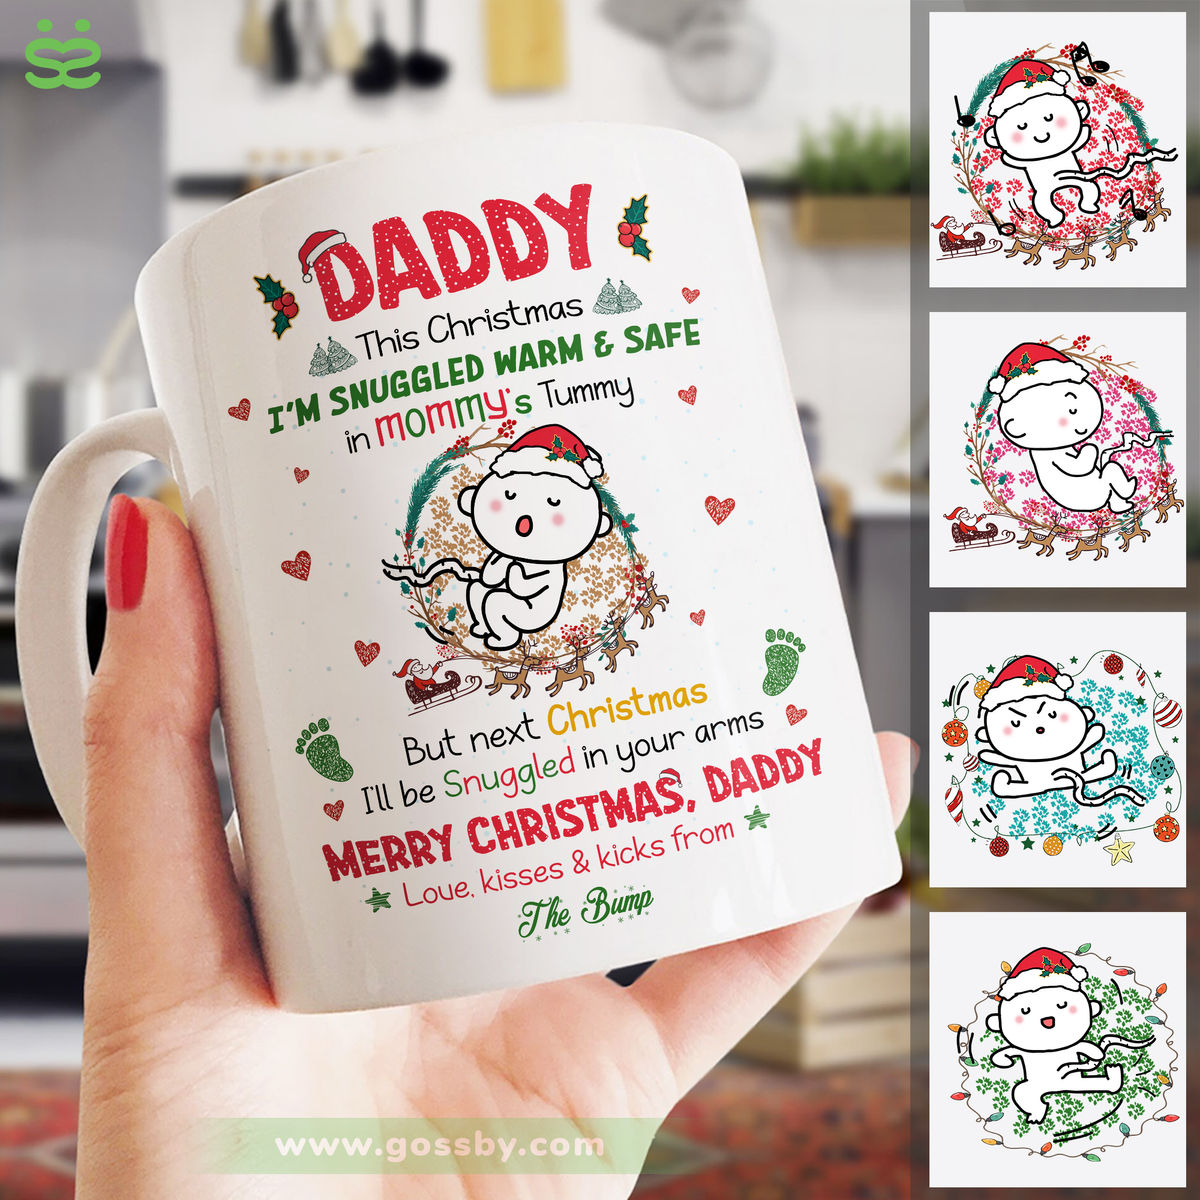 Personalized Mug - Baby Bump Christmas - From The Bump - DADDY - This Christmas I'm Snuggled Warm & Safe In Your Tummy. But next Christmas, I'll be Snuggled in your arms (C)